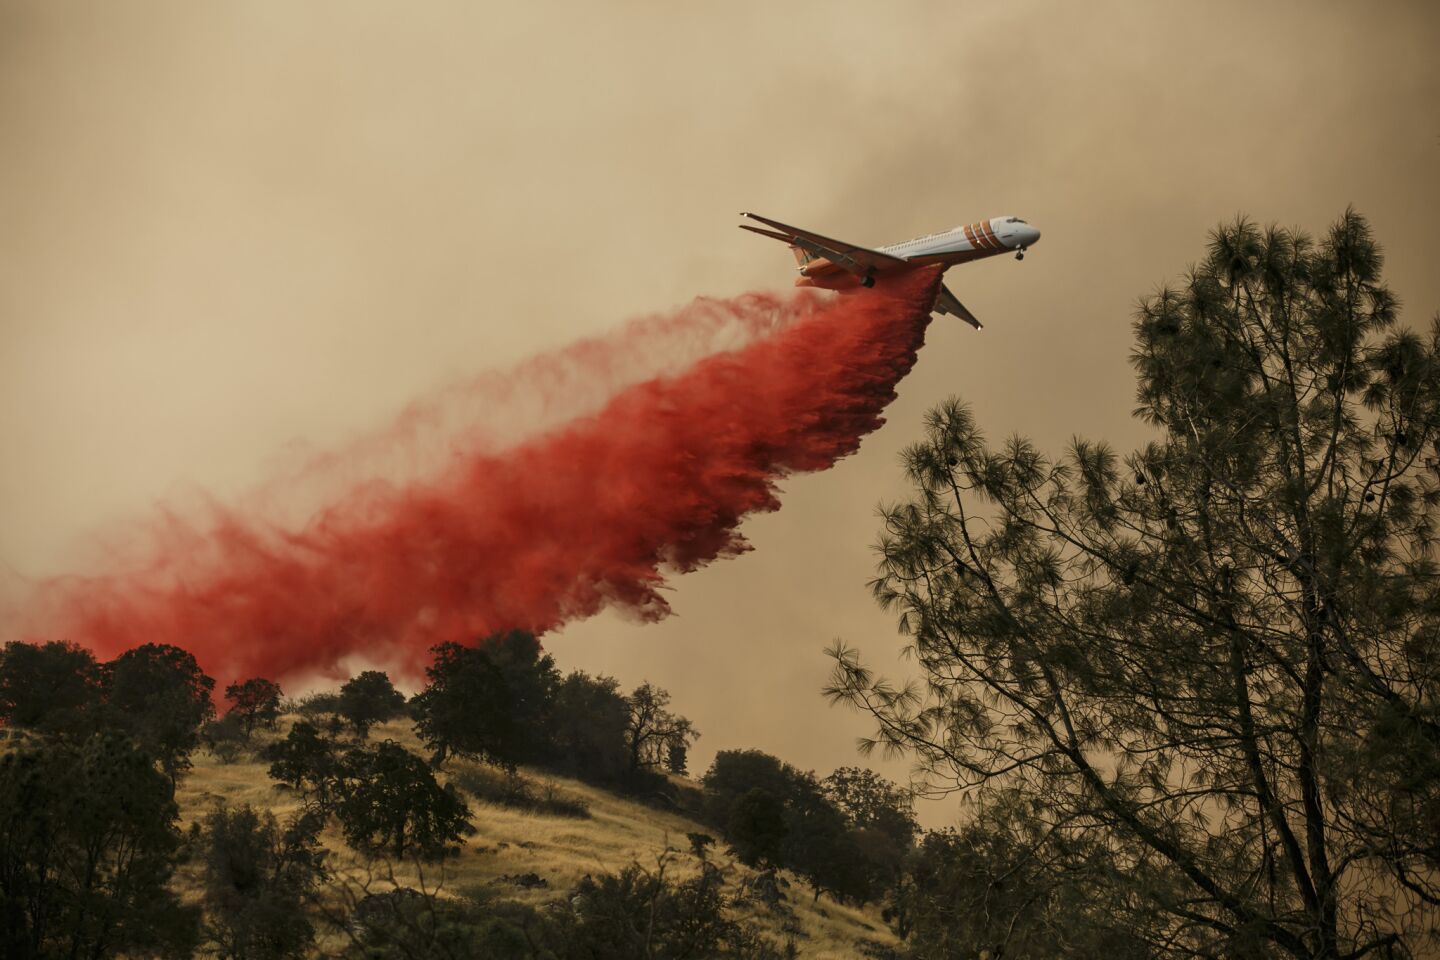 Fire retardant is dropped on a side of a hill near Mariposa, Calif.